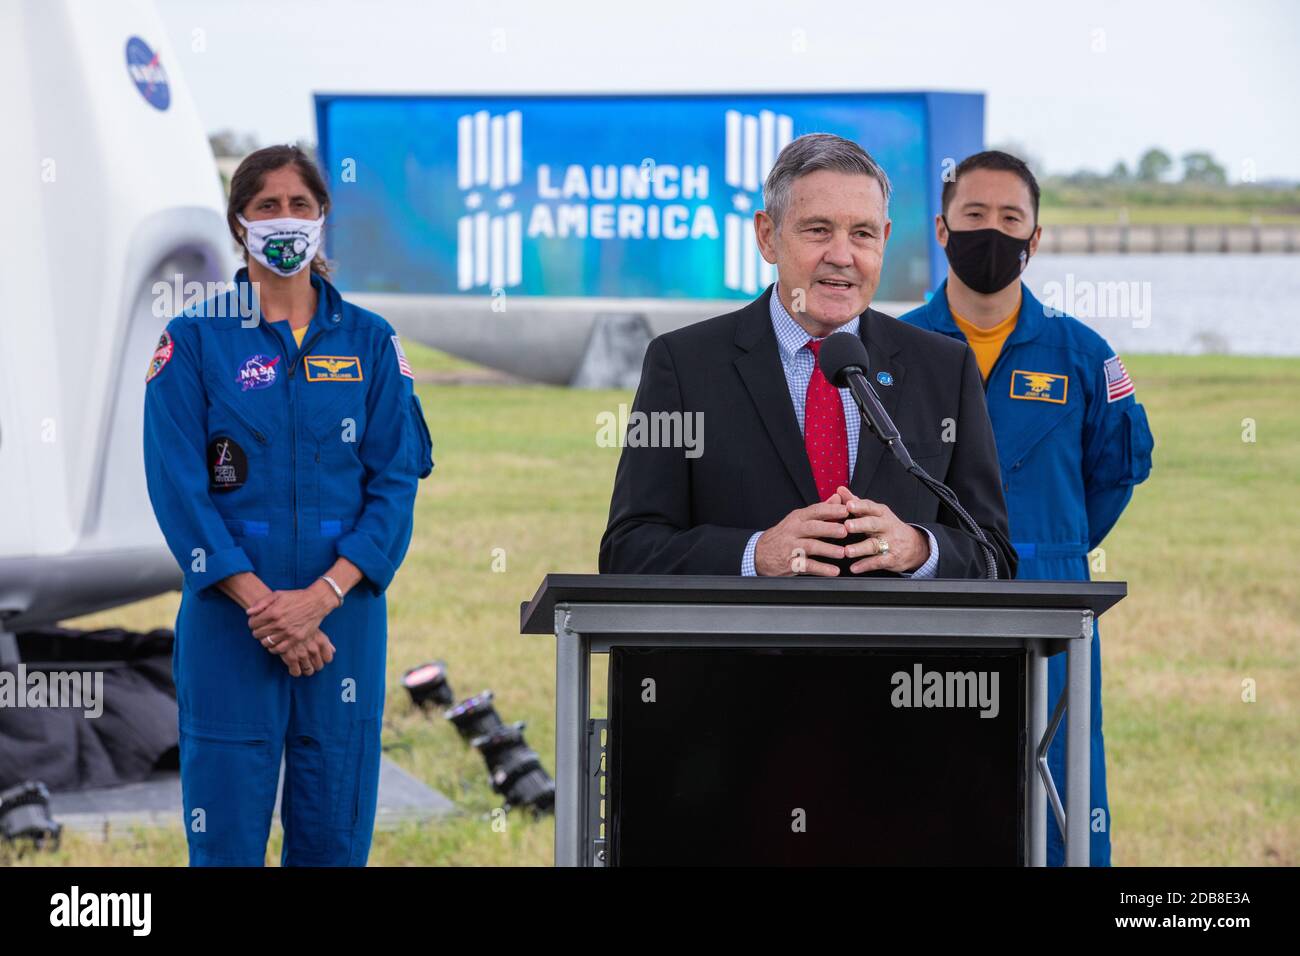 Kennedy Space Center Director Bob Cabana, speaks to members of the media during a press conference ahead of the Crew-1 launch at the Kennedy Space Center November 13, 2020 in Cape Canaveral, Florida. Standing with Cabana are NASA astronauts Sunita Williams, left, and Jonny Kim. Stock Photo